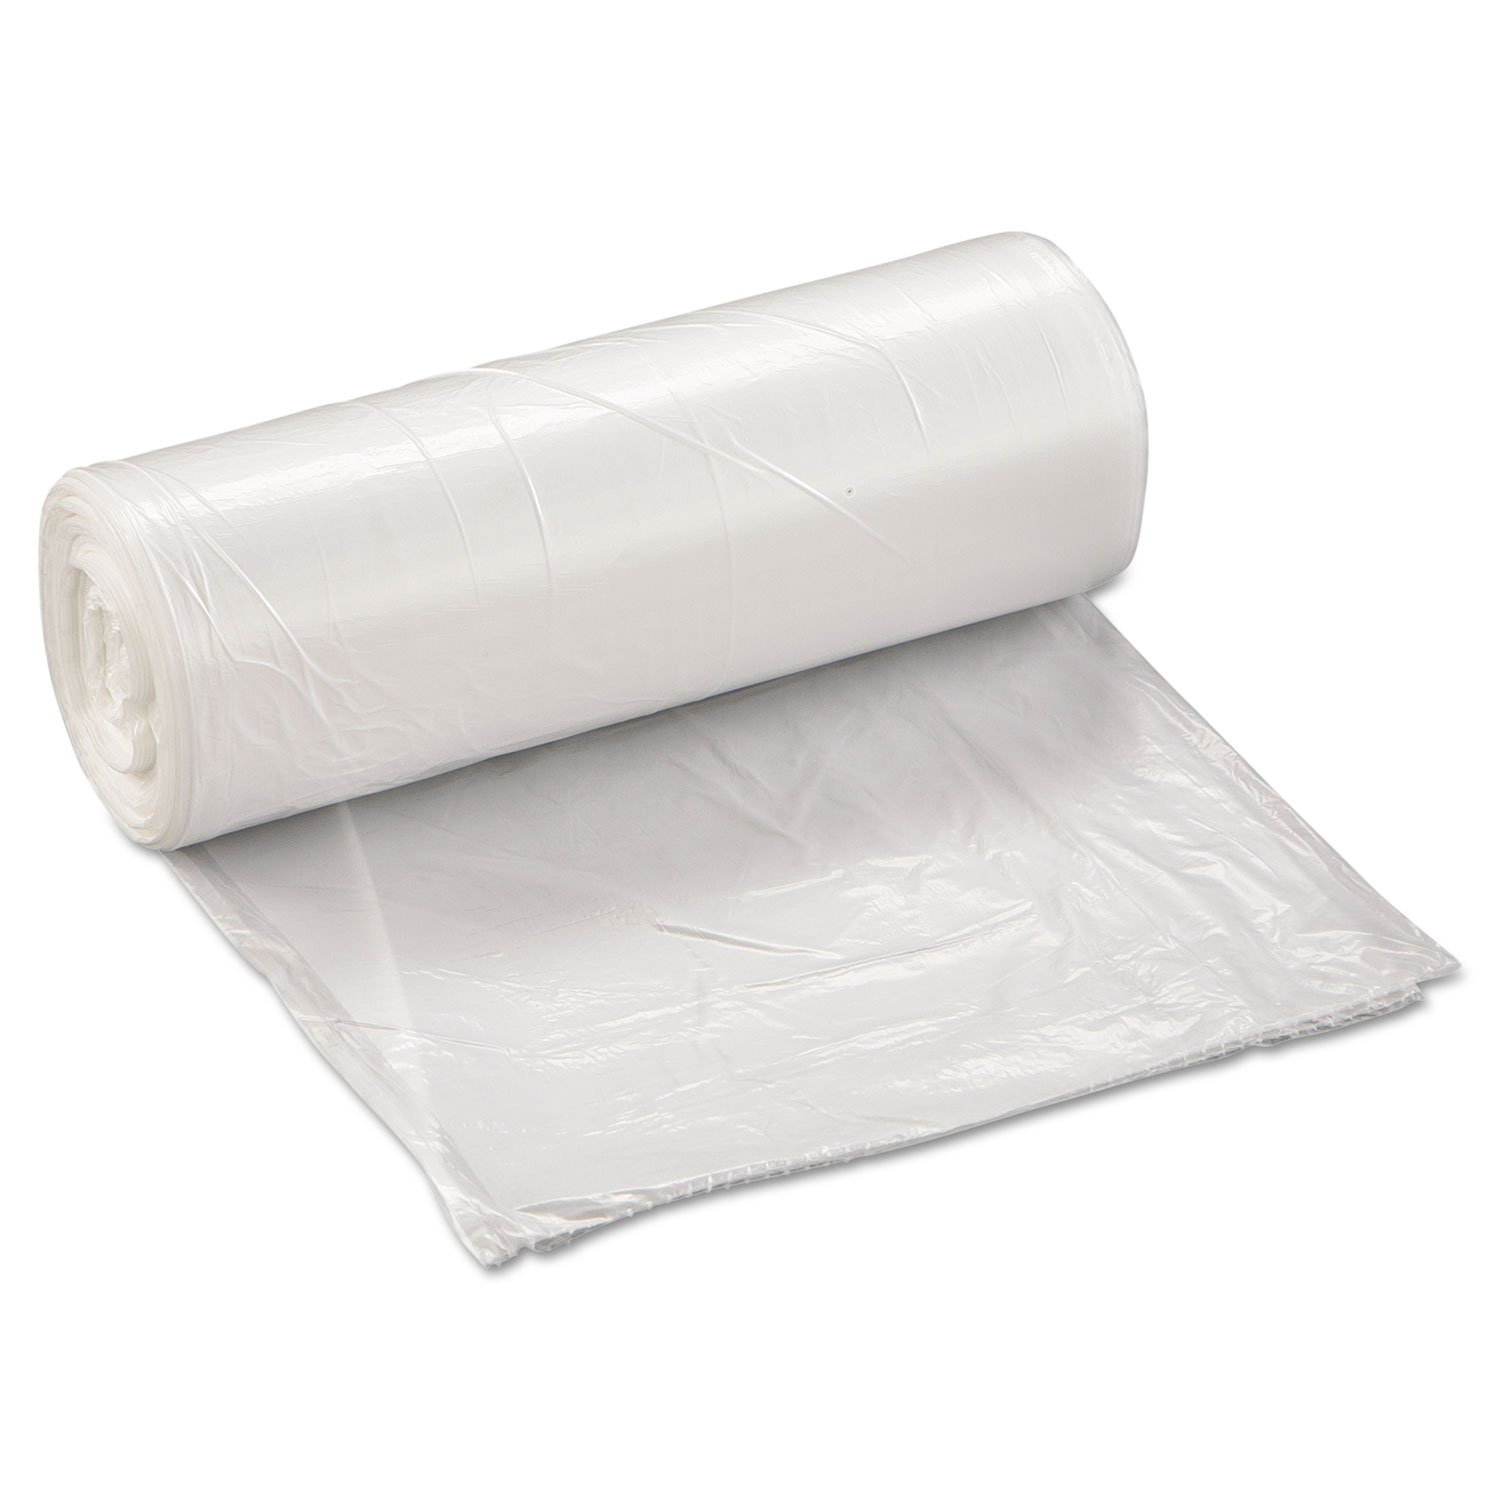  Inteplast Group WSL2424LTN Low-Density Commercial Can Liners, 10 gal, 0.35 mil, 24 x 24, Clear, 1,000/Carton (IBSSL2424LTN) 